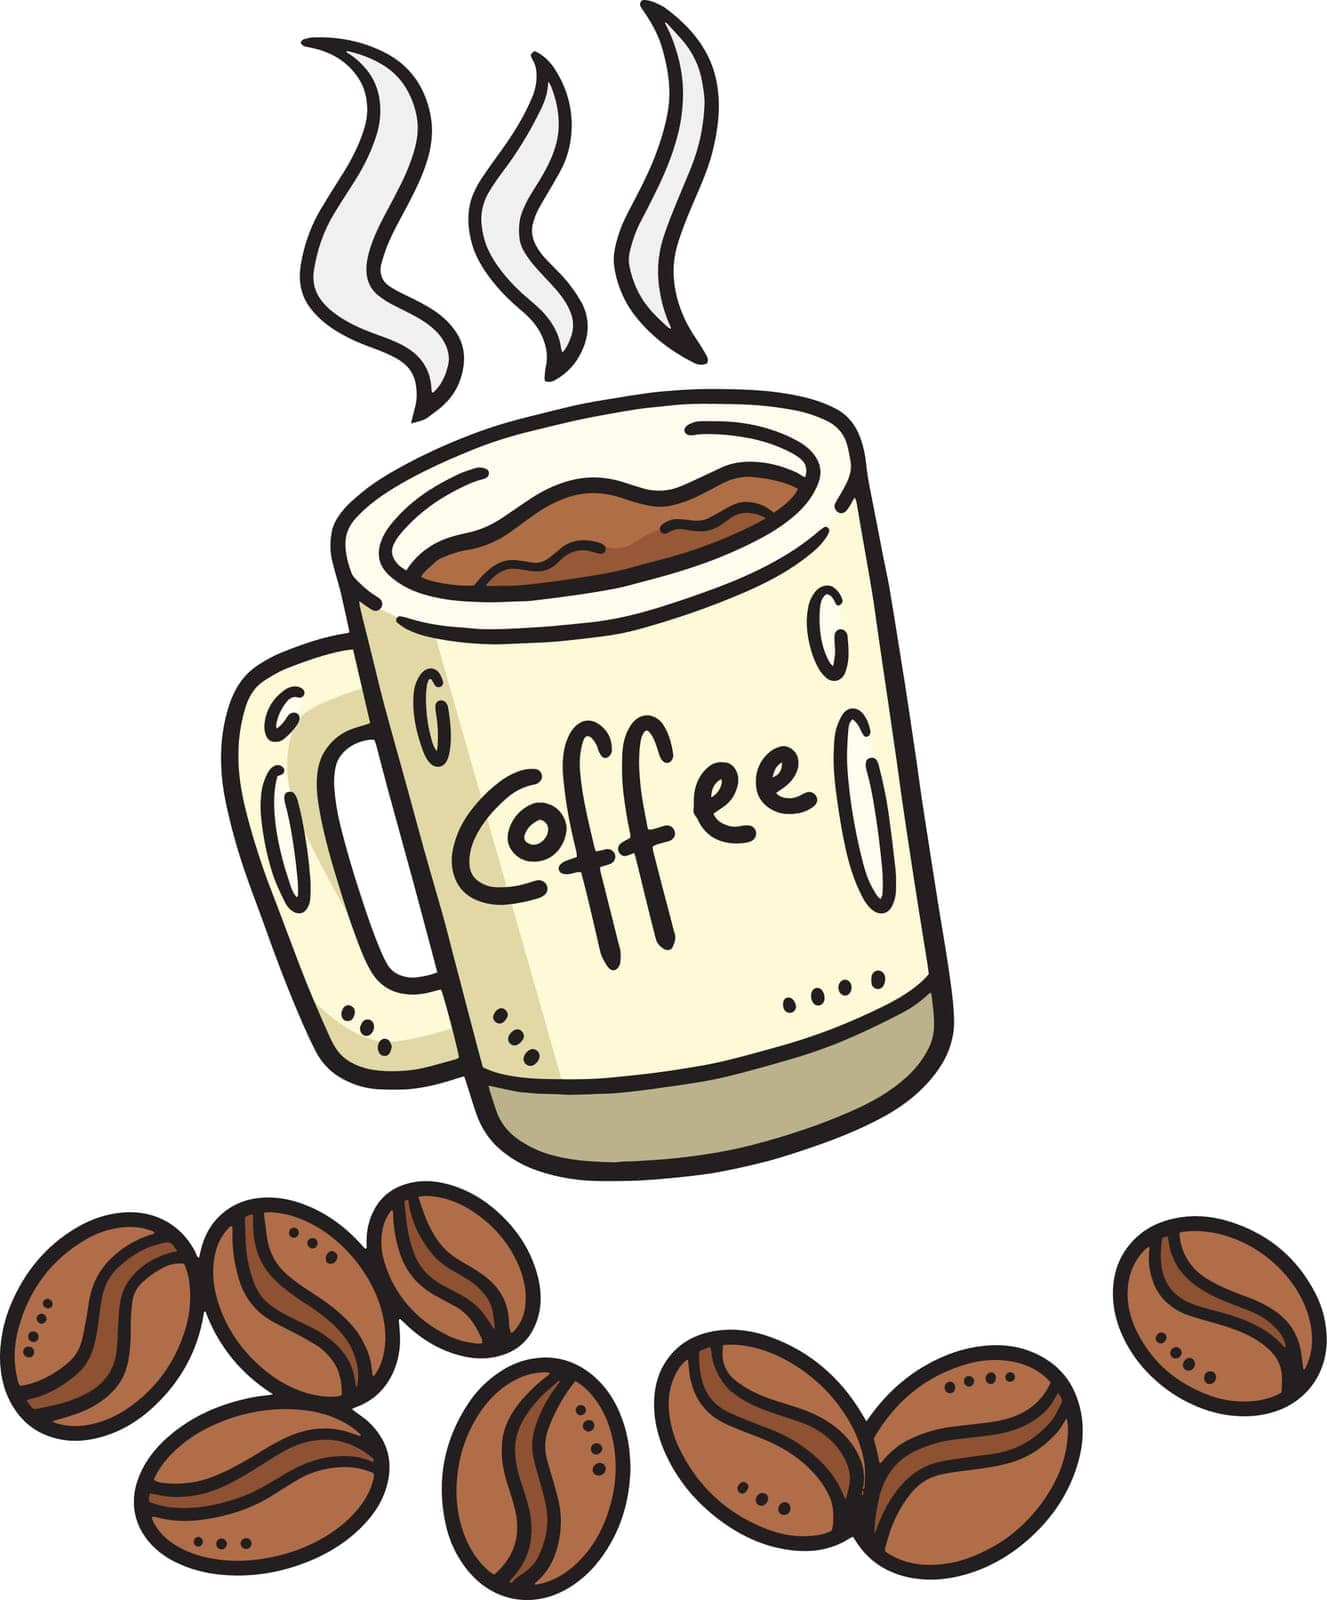 Mug with Coffee and Coffee Beans Cartoon Clipart by abbydesign